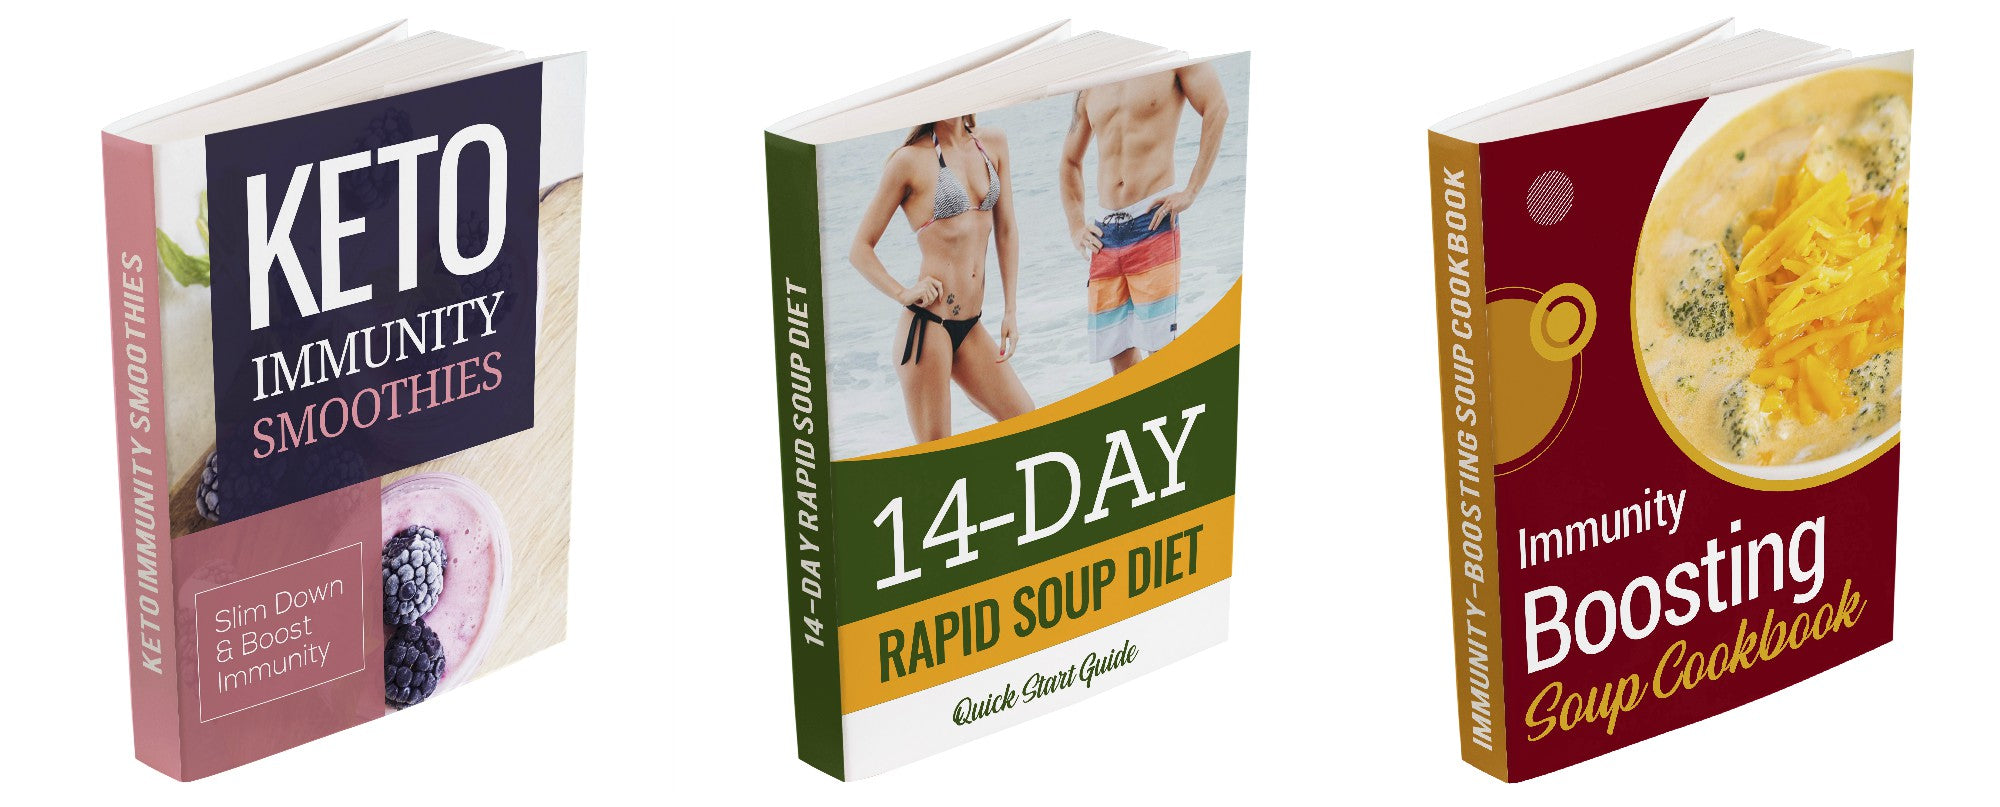 Lose Weight Fast - 14 Day Rapid Soup Diet